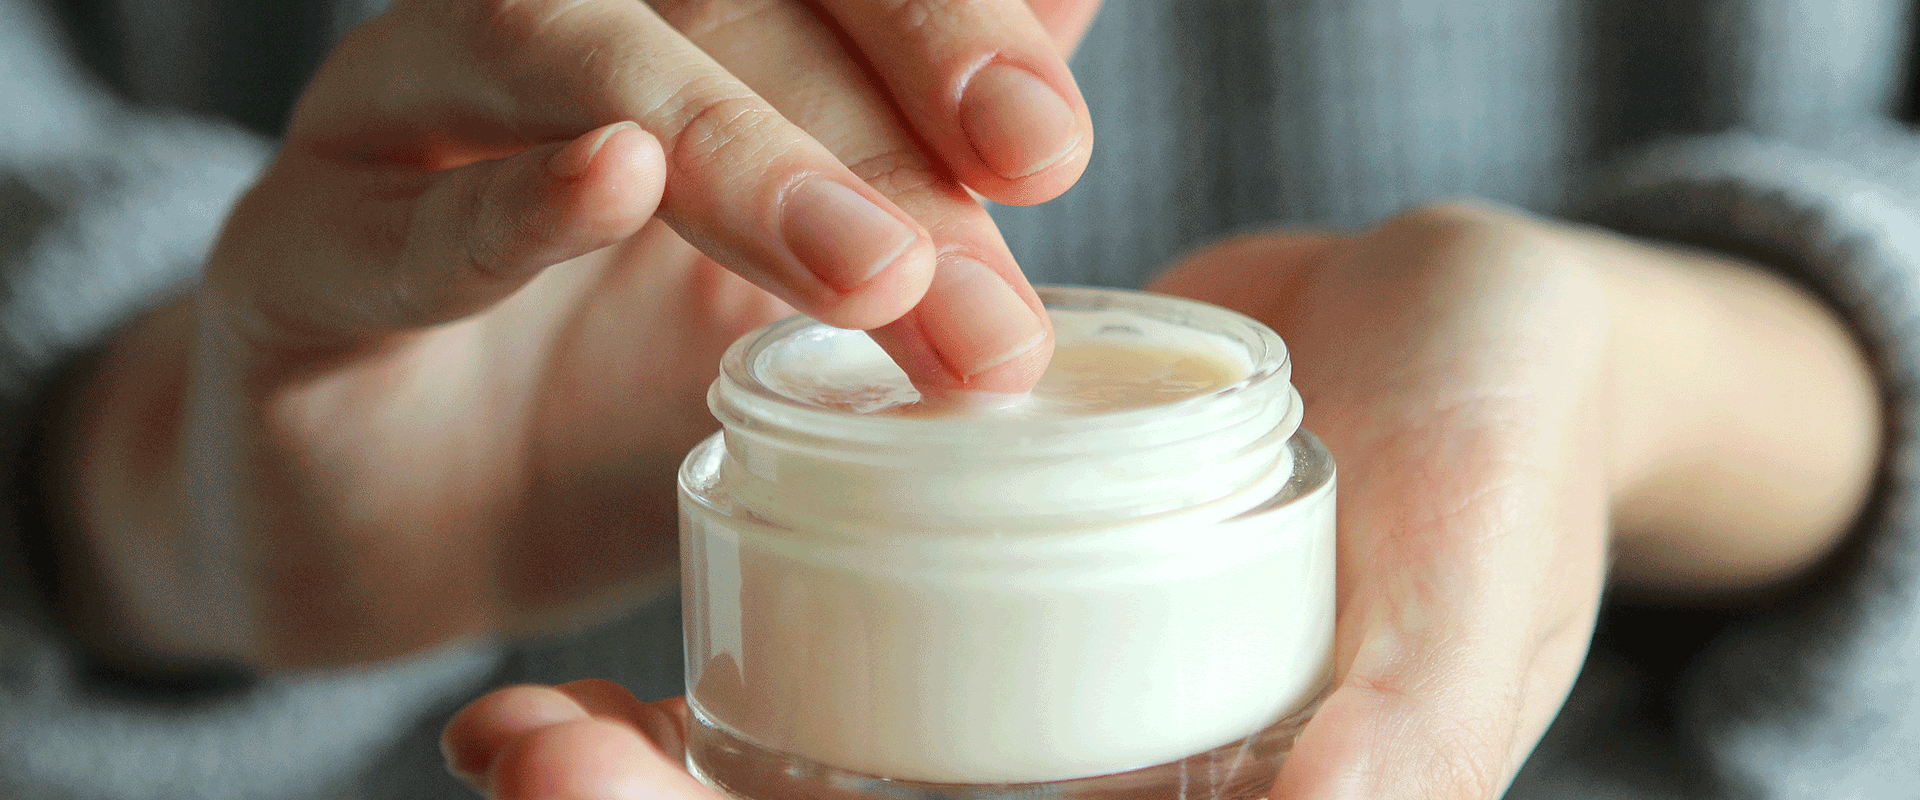 hand holding lotion container